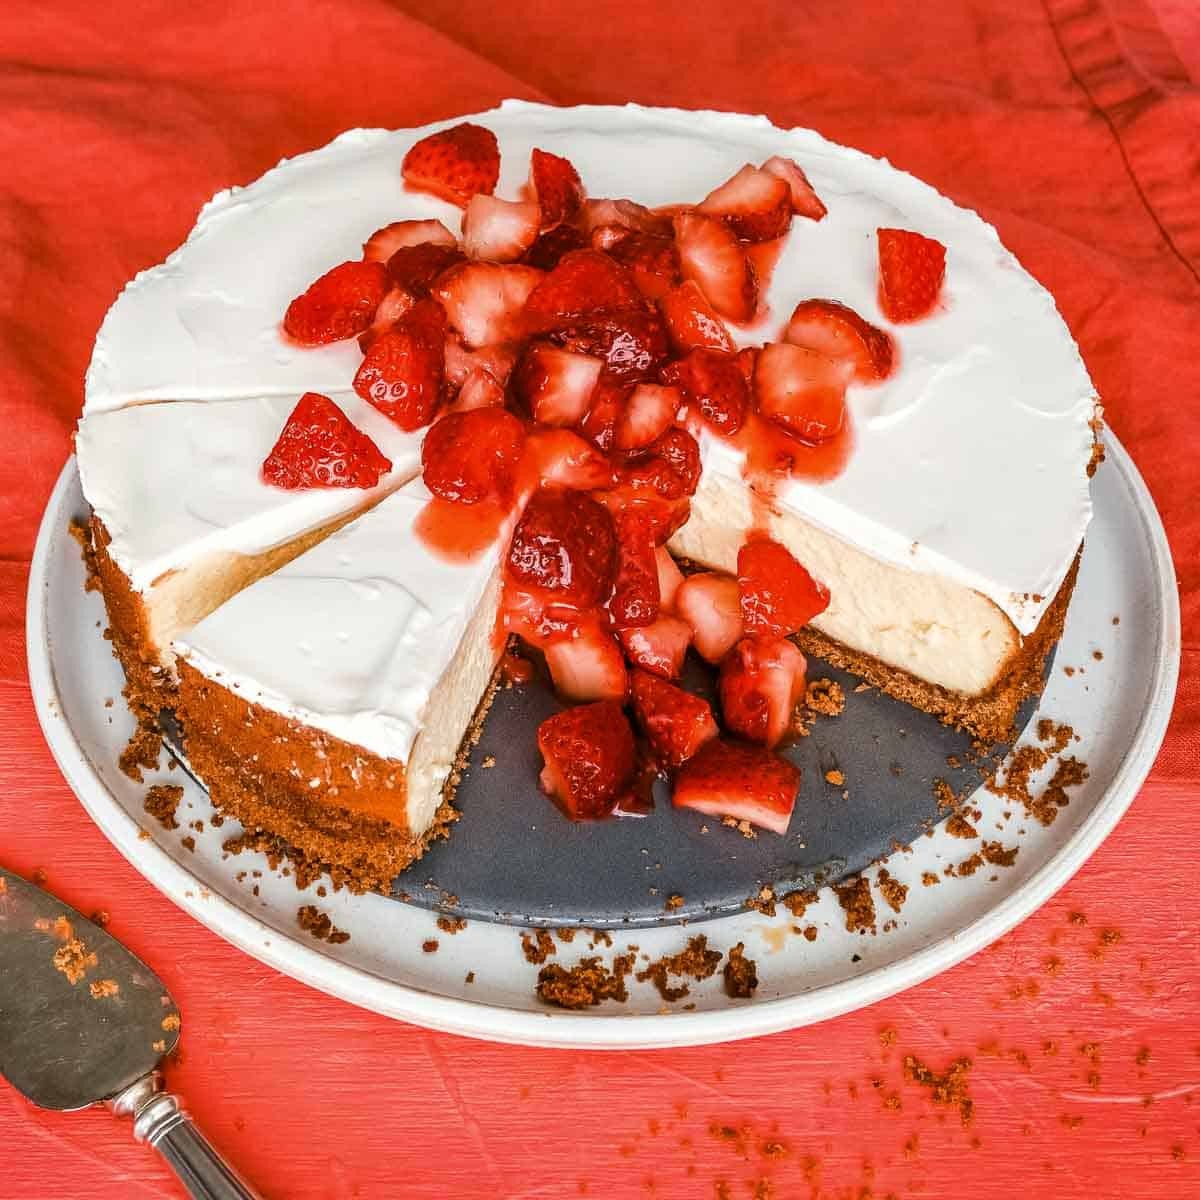 Vanilla cheesecake topped with chopped strawberries on a white platter on an orange table next to a spatula.